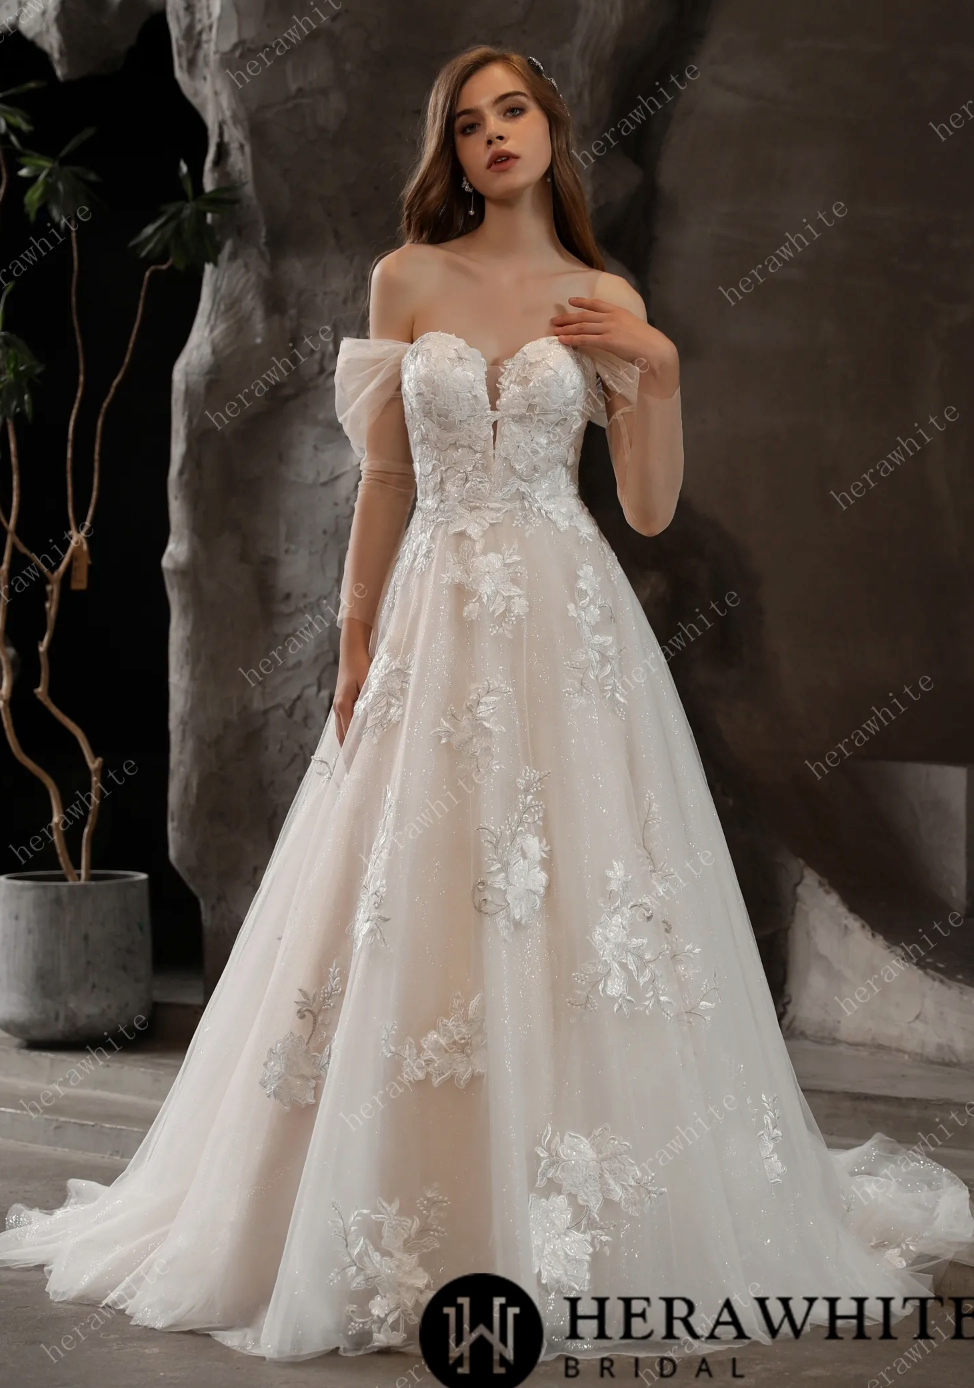 Load image into Gallery viewer, Off-The-Shoulder Romantic Wedding Ball Gown with Glamorous Floral Motifs
